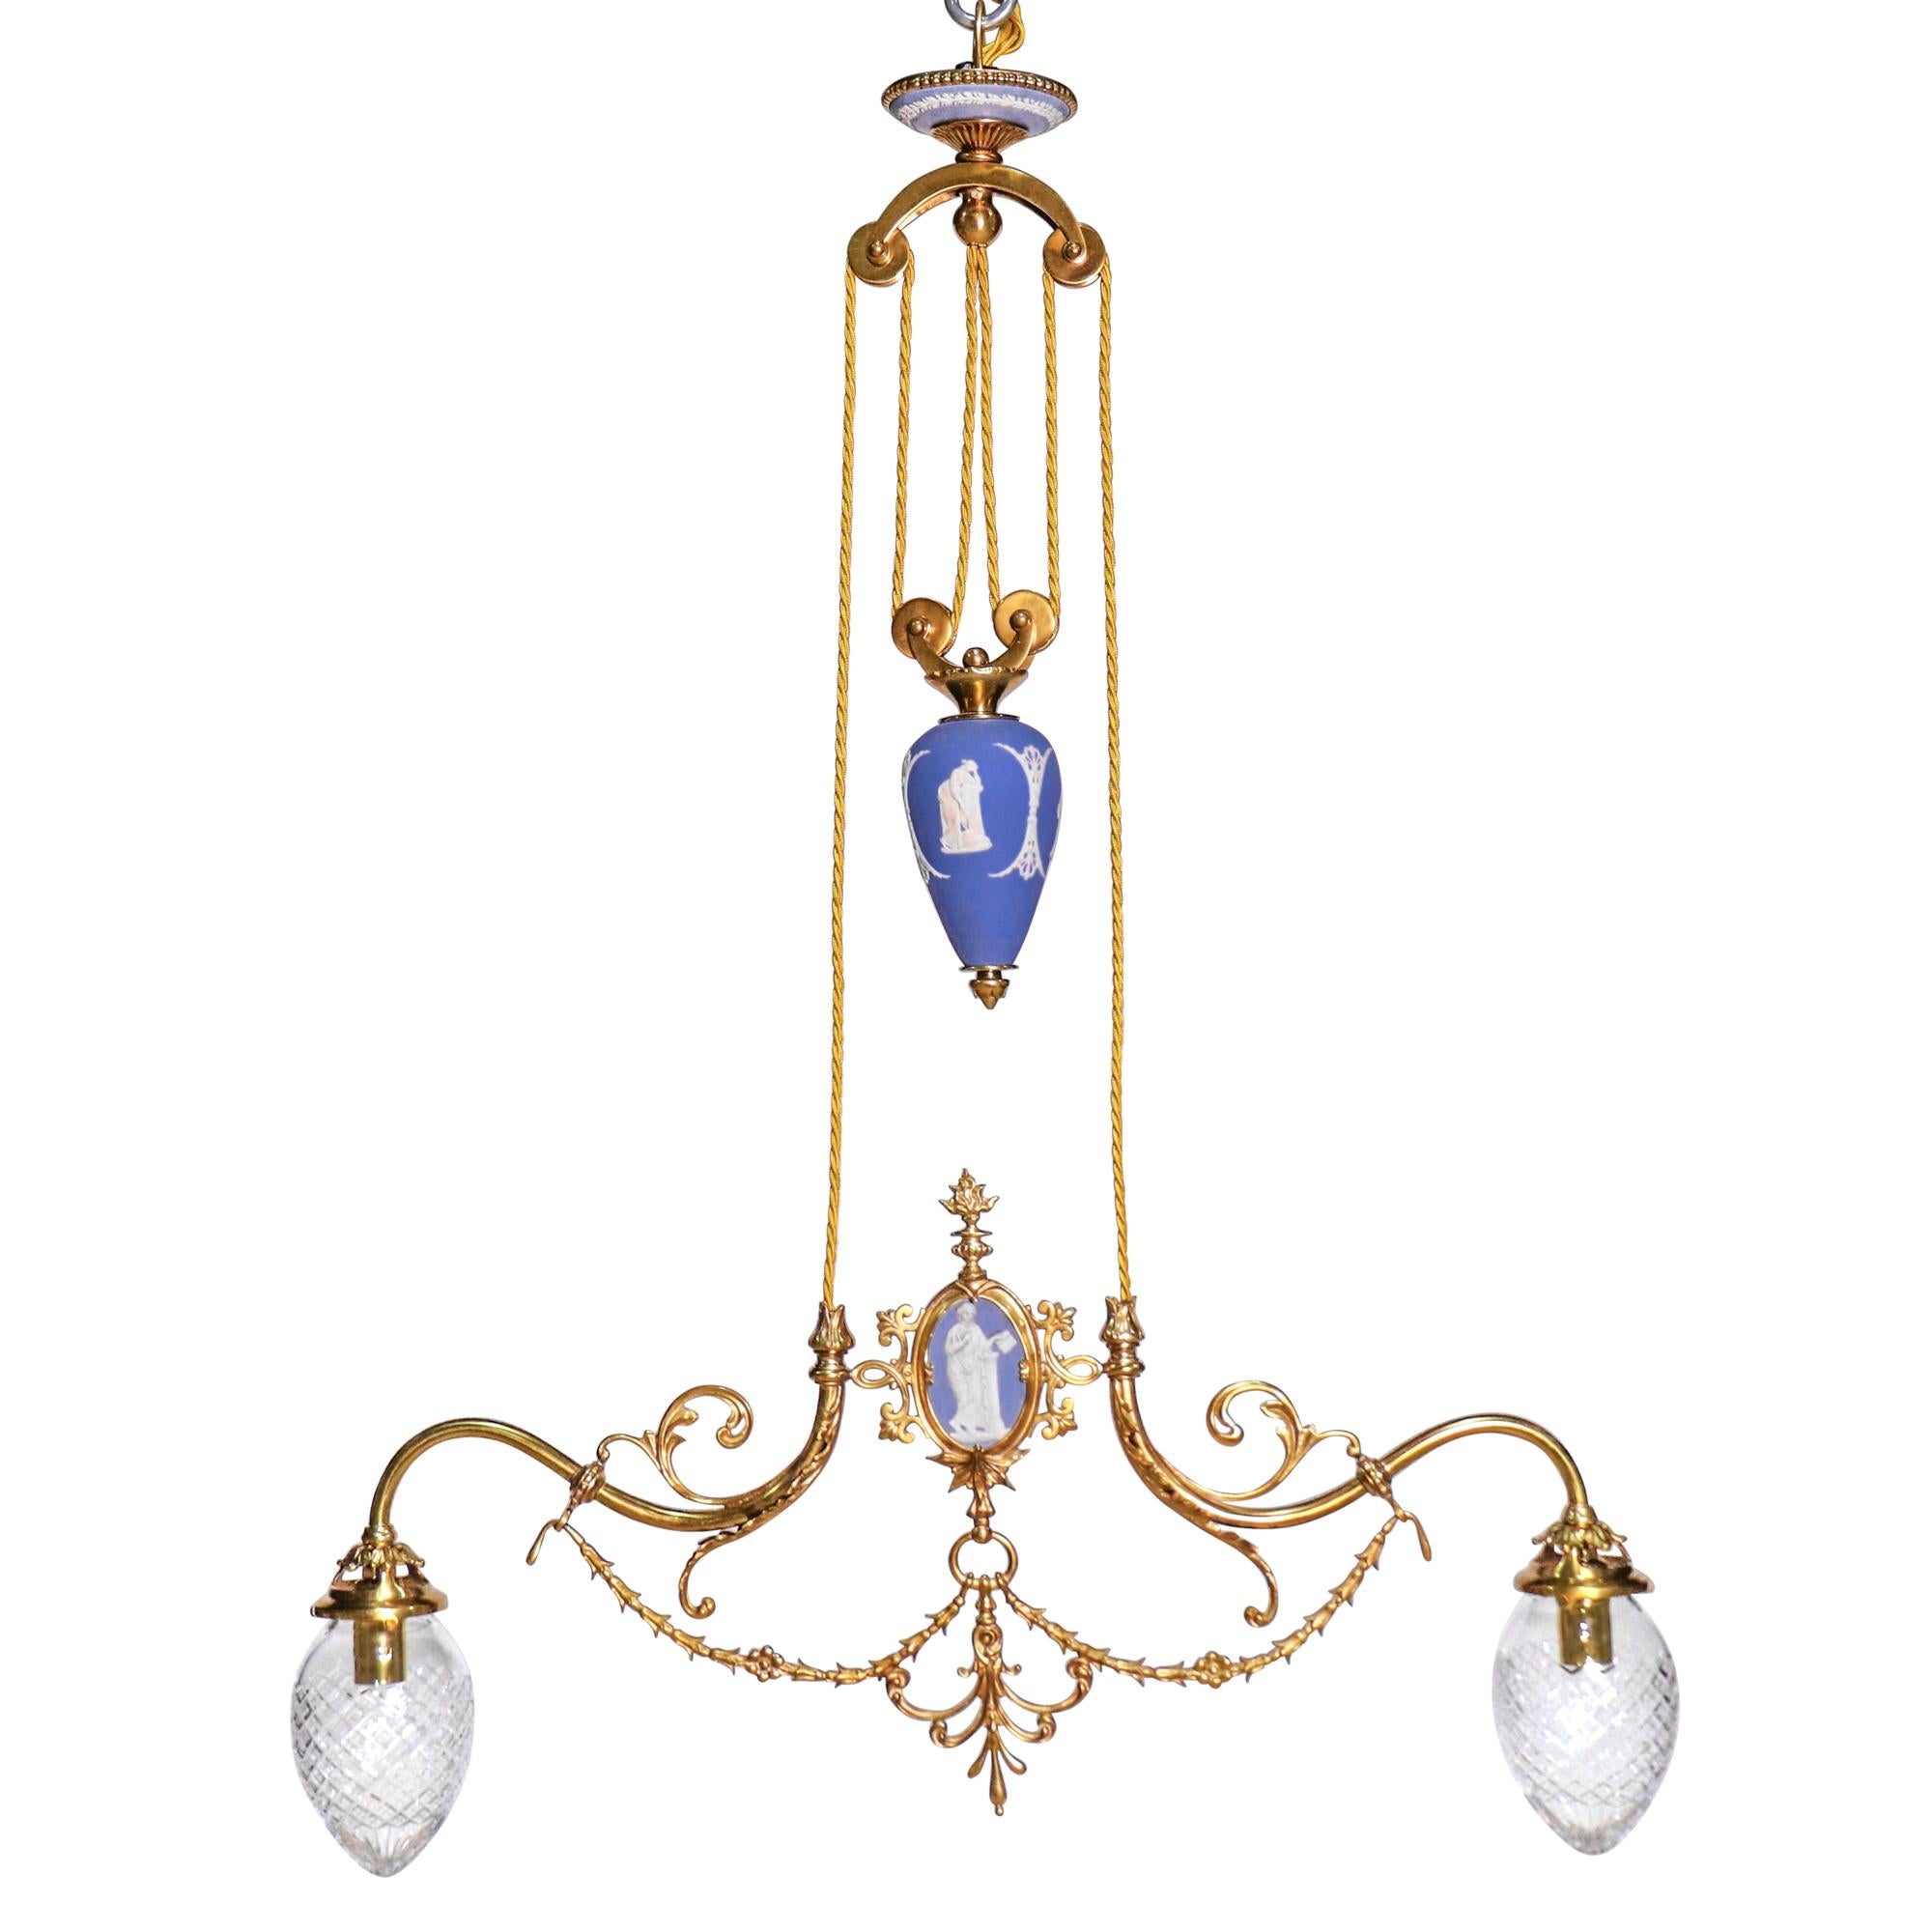 Pair of English Barbell Chandeliers by Wedgwood with blue jasperware, chiseled bronze accents and two bulbs covered by decorated clear glass egg shape diffusers.

Each chandelier consists of a canopy, egg-shaped urn and two arms, adorned with a